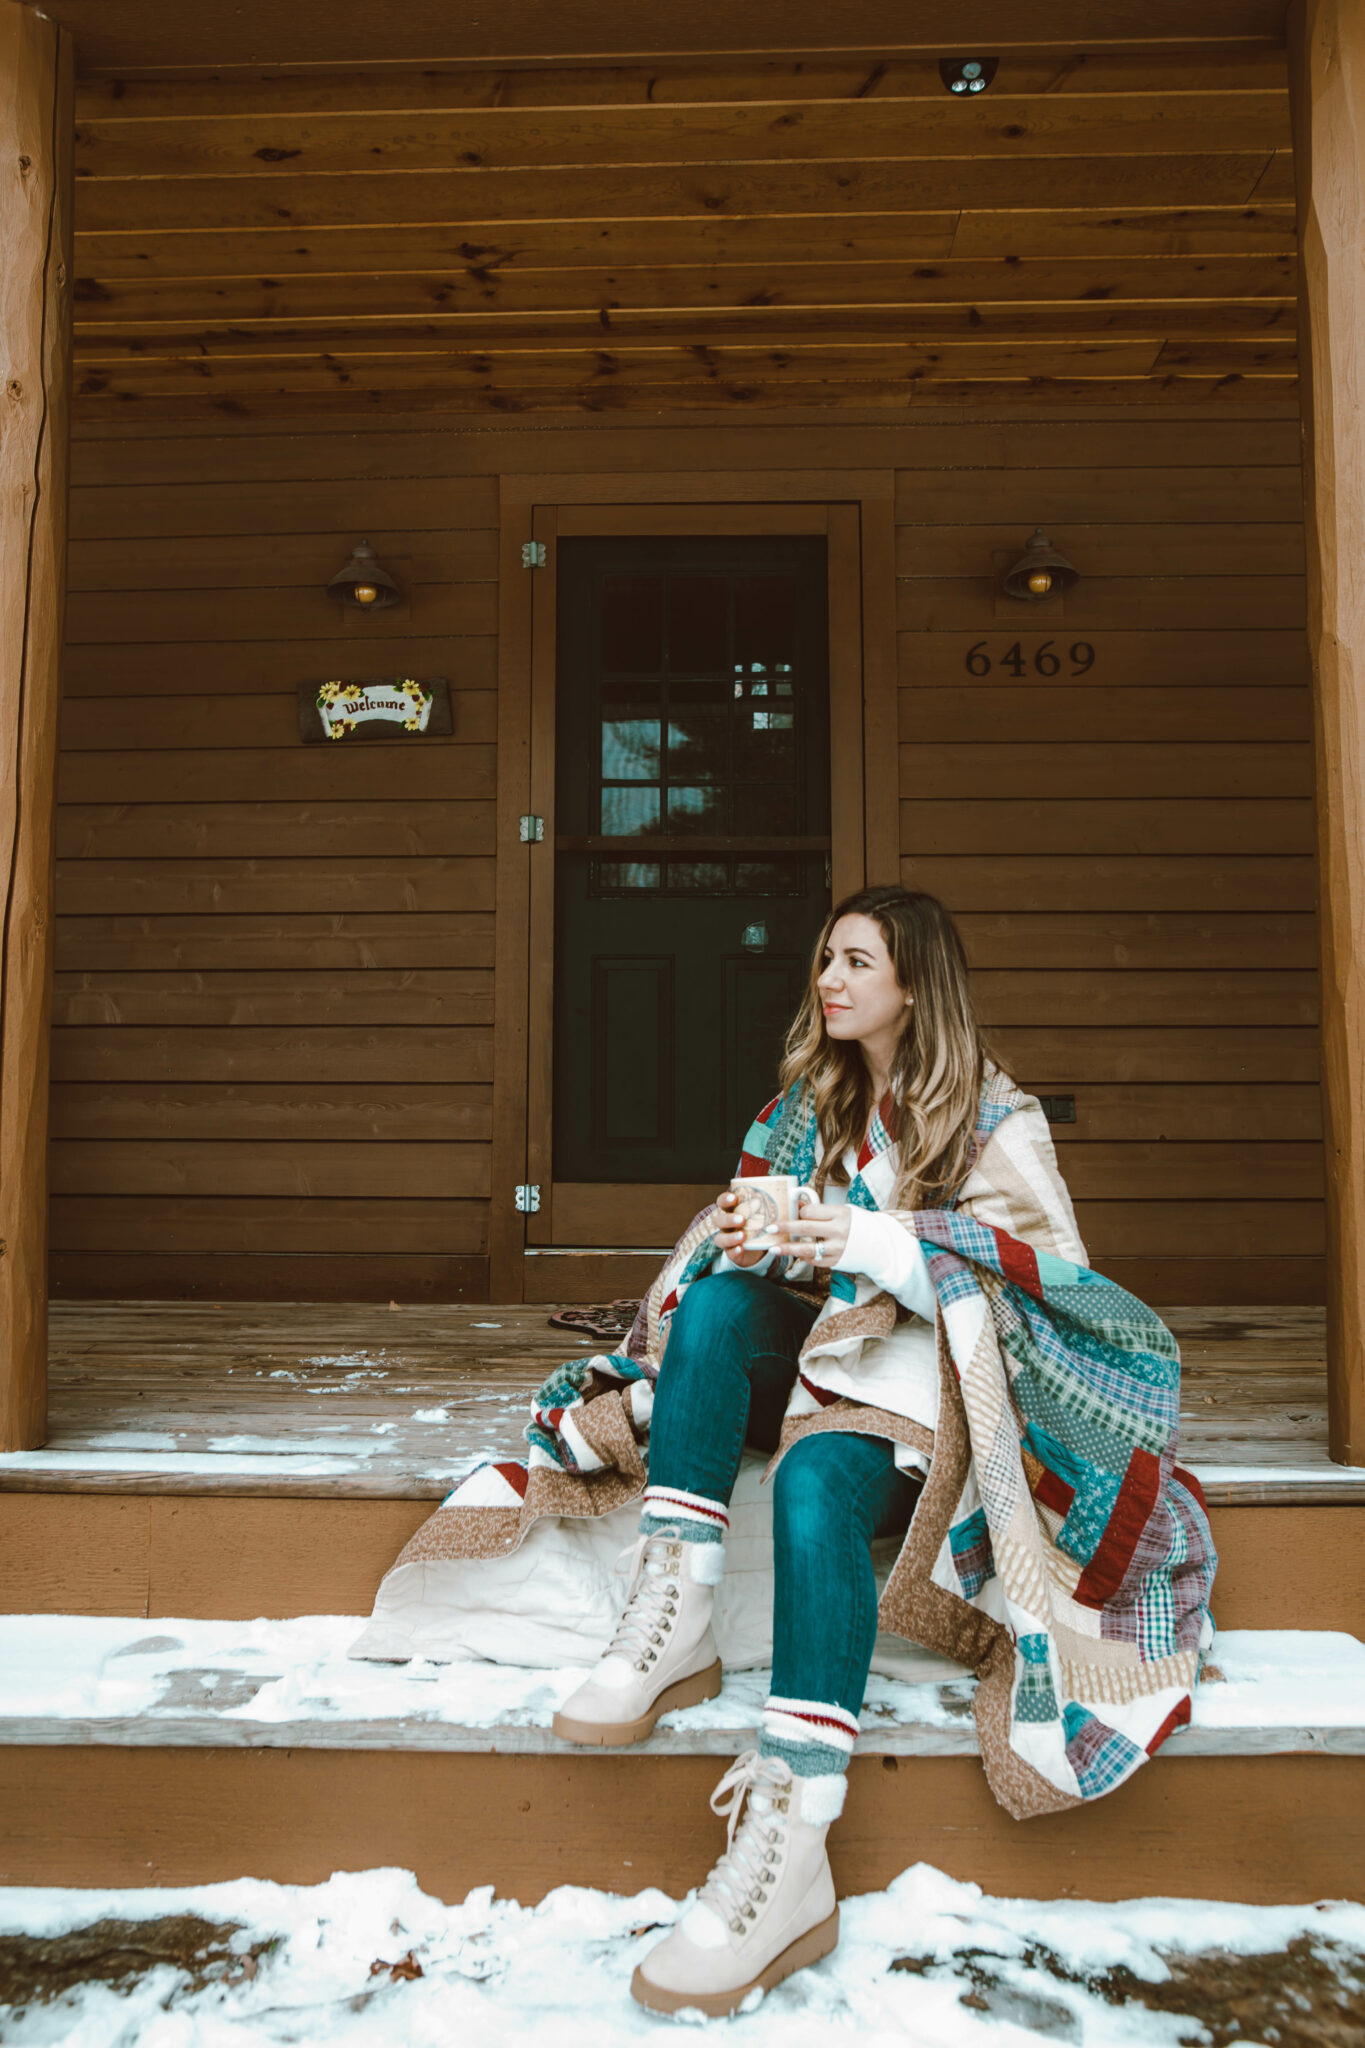 Fashion Basics by popular Chicago fashion blog, Glass of Glam: image of a woman sitting on outside of her cabin on the steps of her front porched wrapped up in a blanket and wearing a white henley t-shirt, jeans, JustFab hiking boots, and cabin socks.